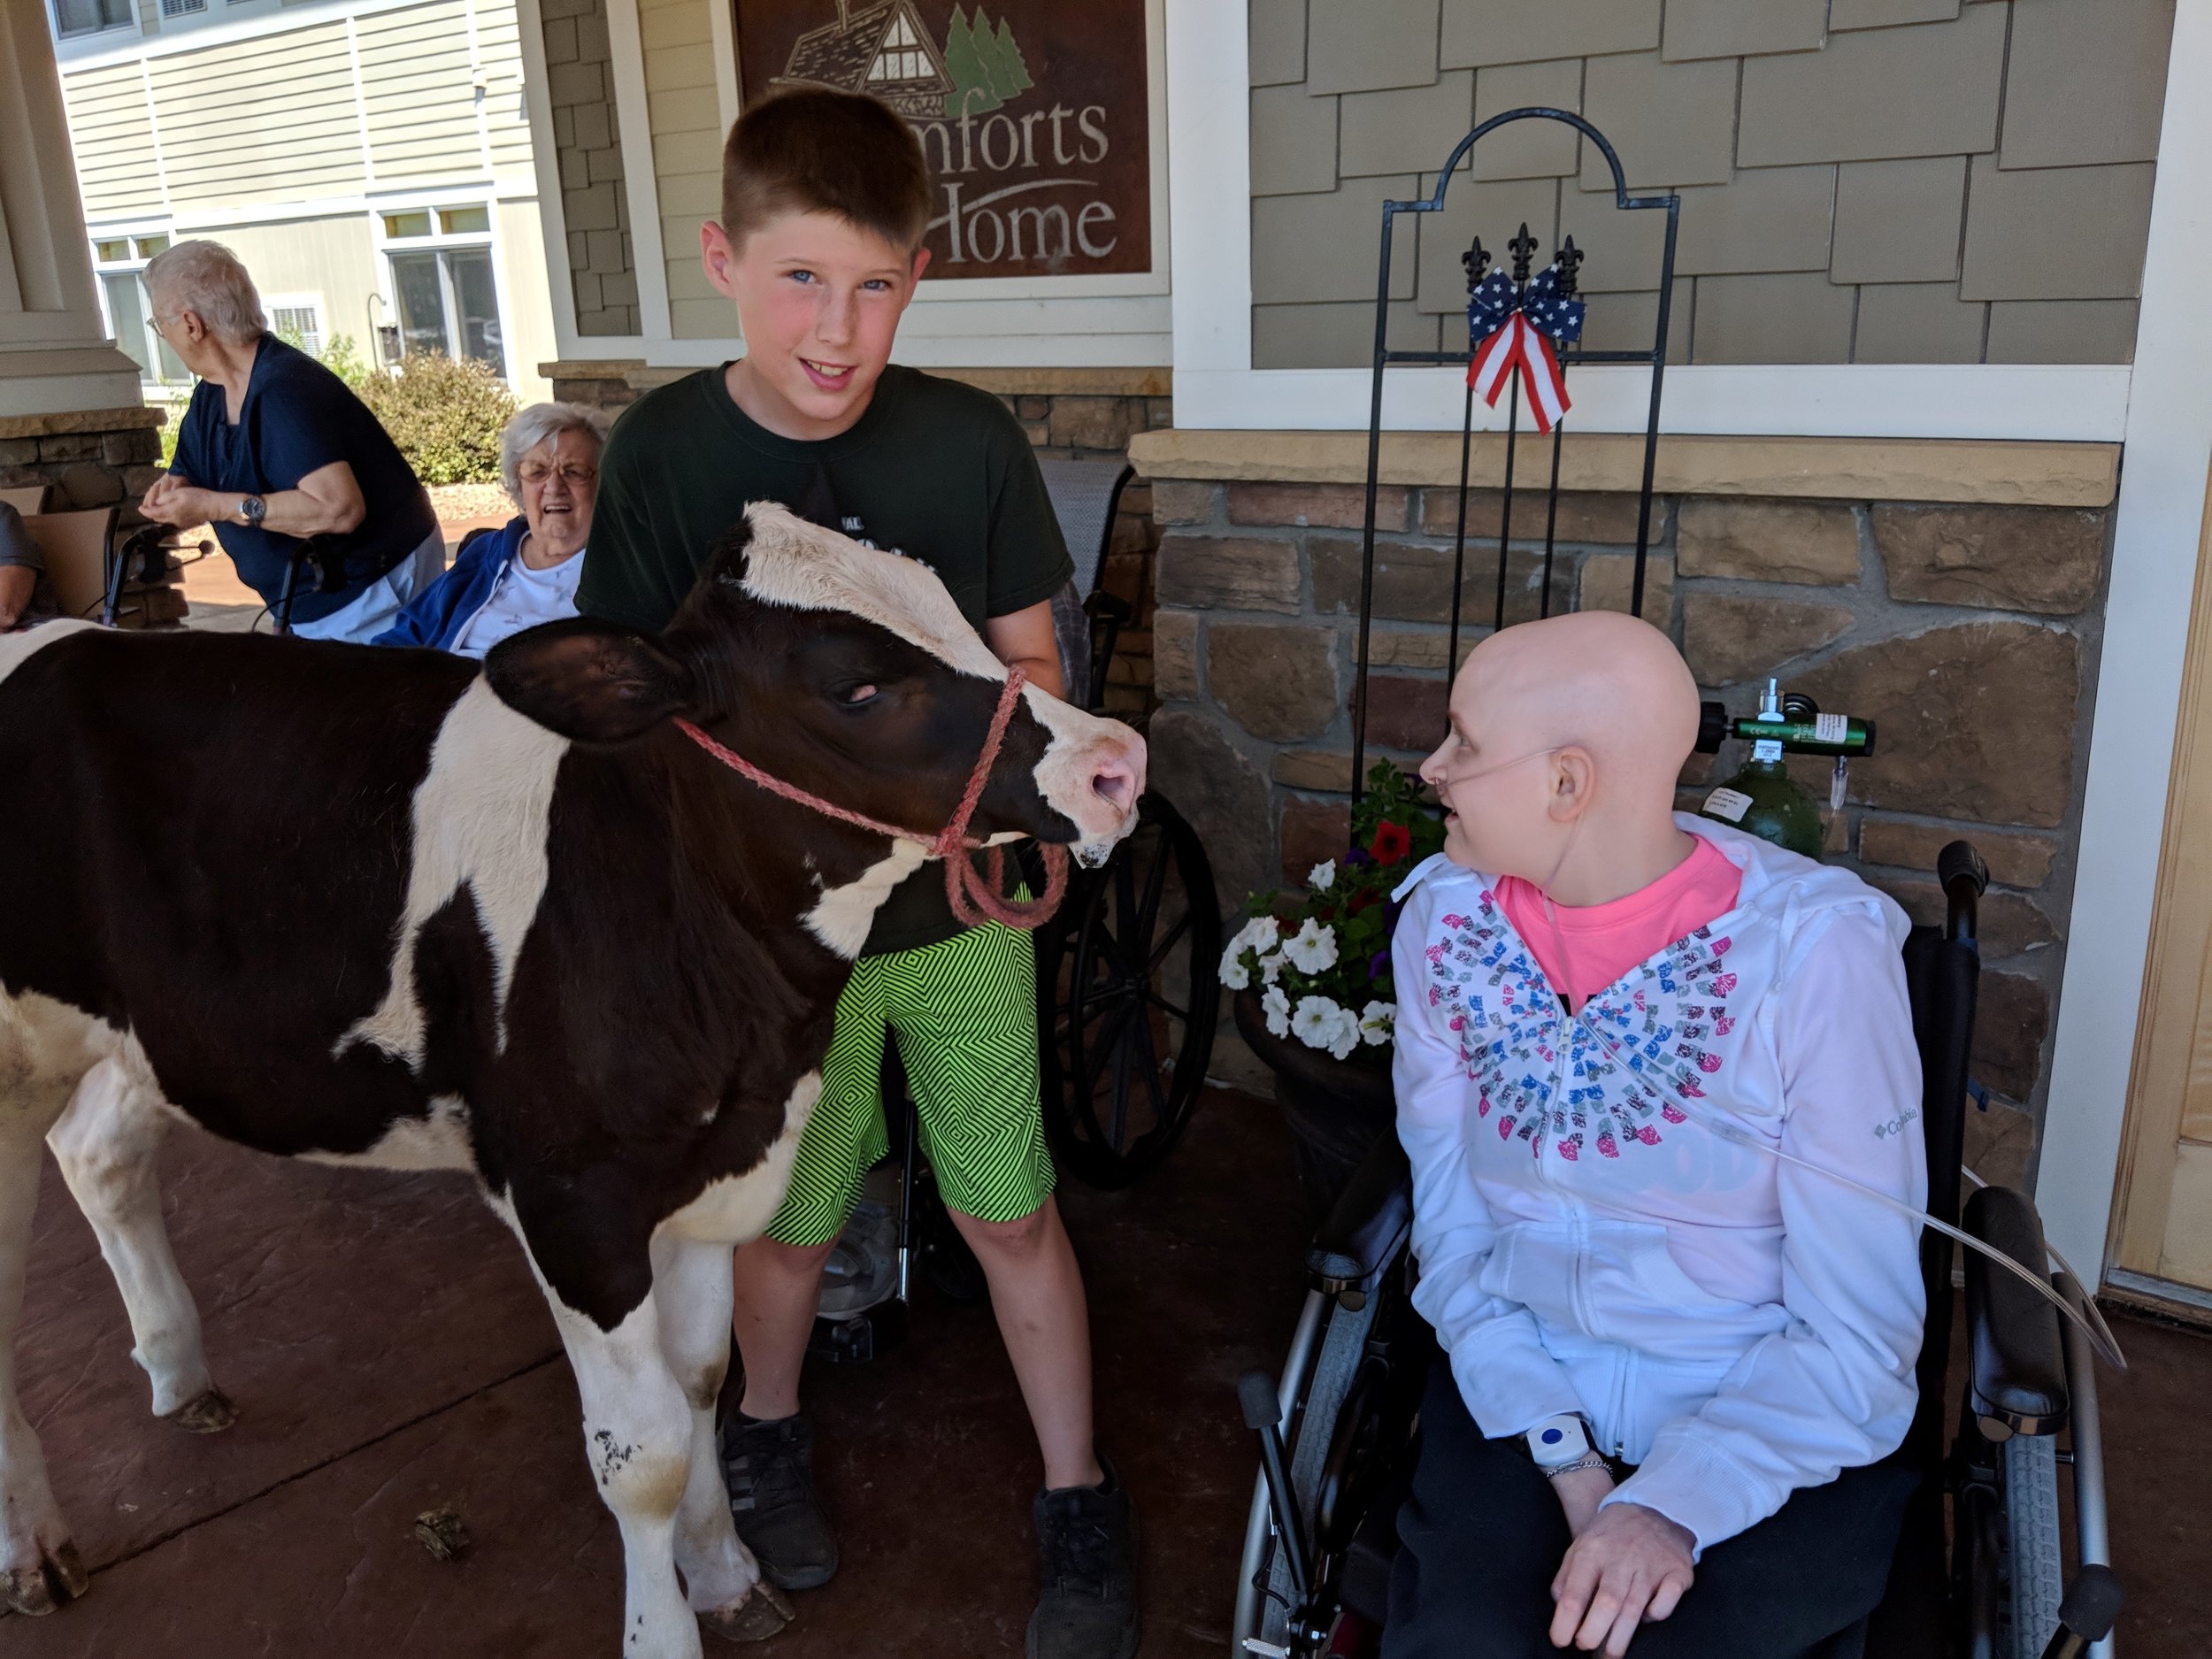 A visit from a fair calf & a donkey!! Thank you Courtney for sharing your time and animals with our tenants! 1.jpg